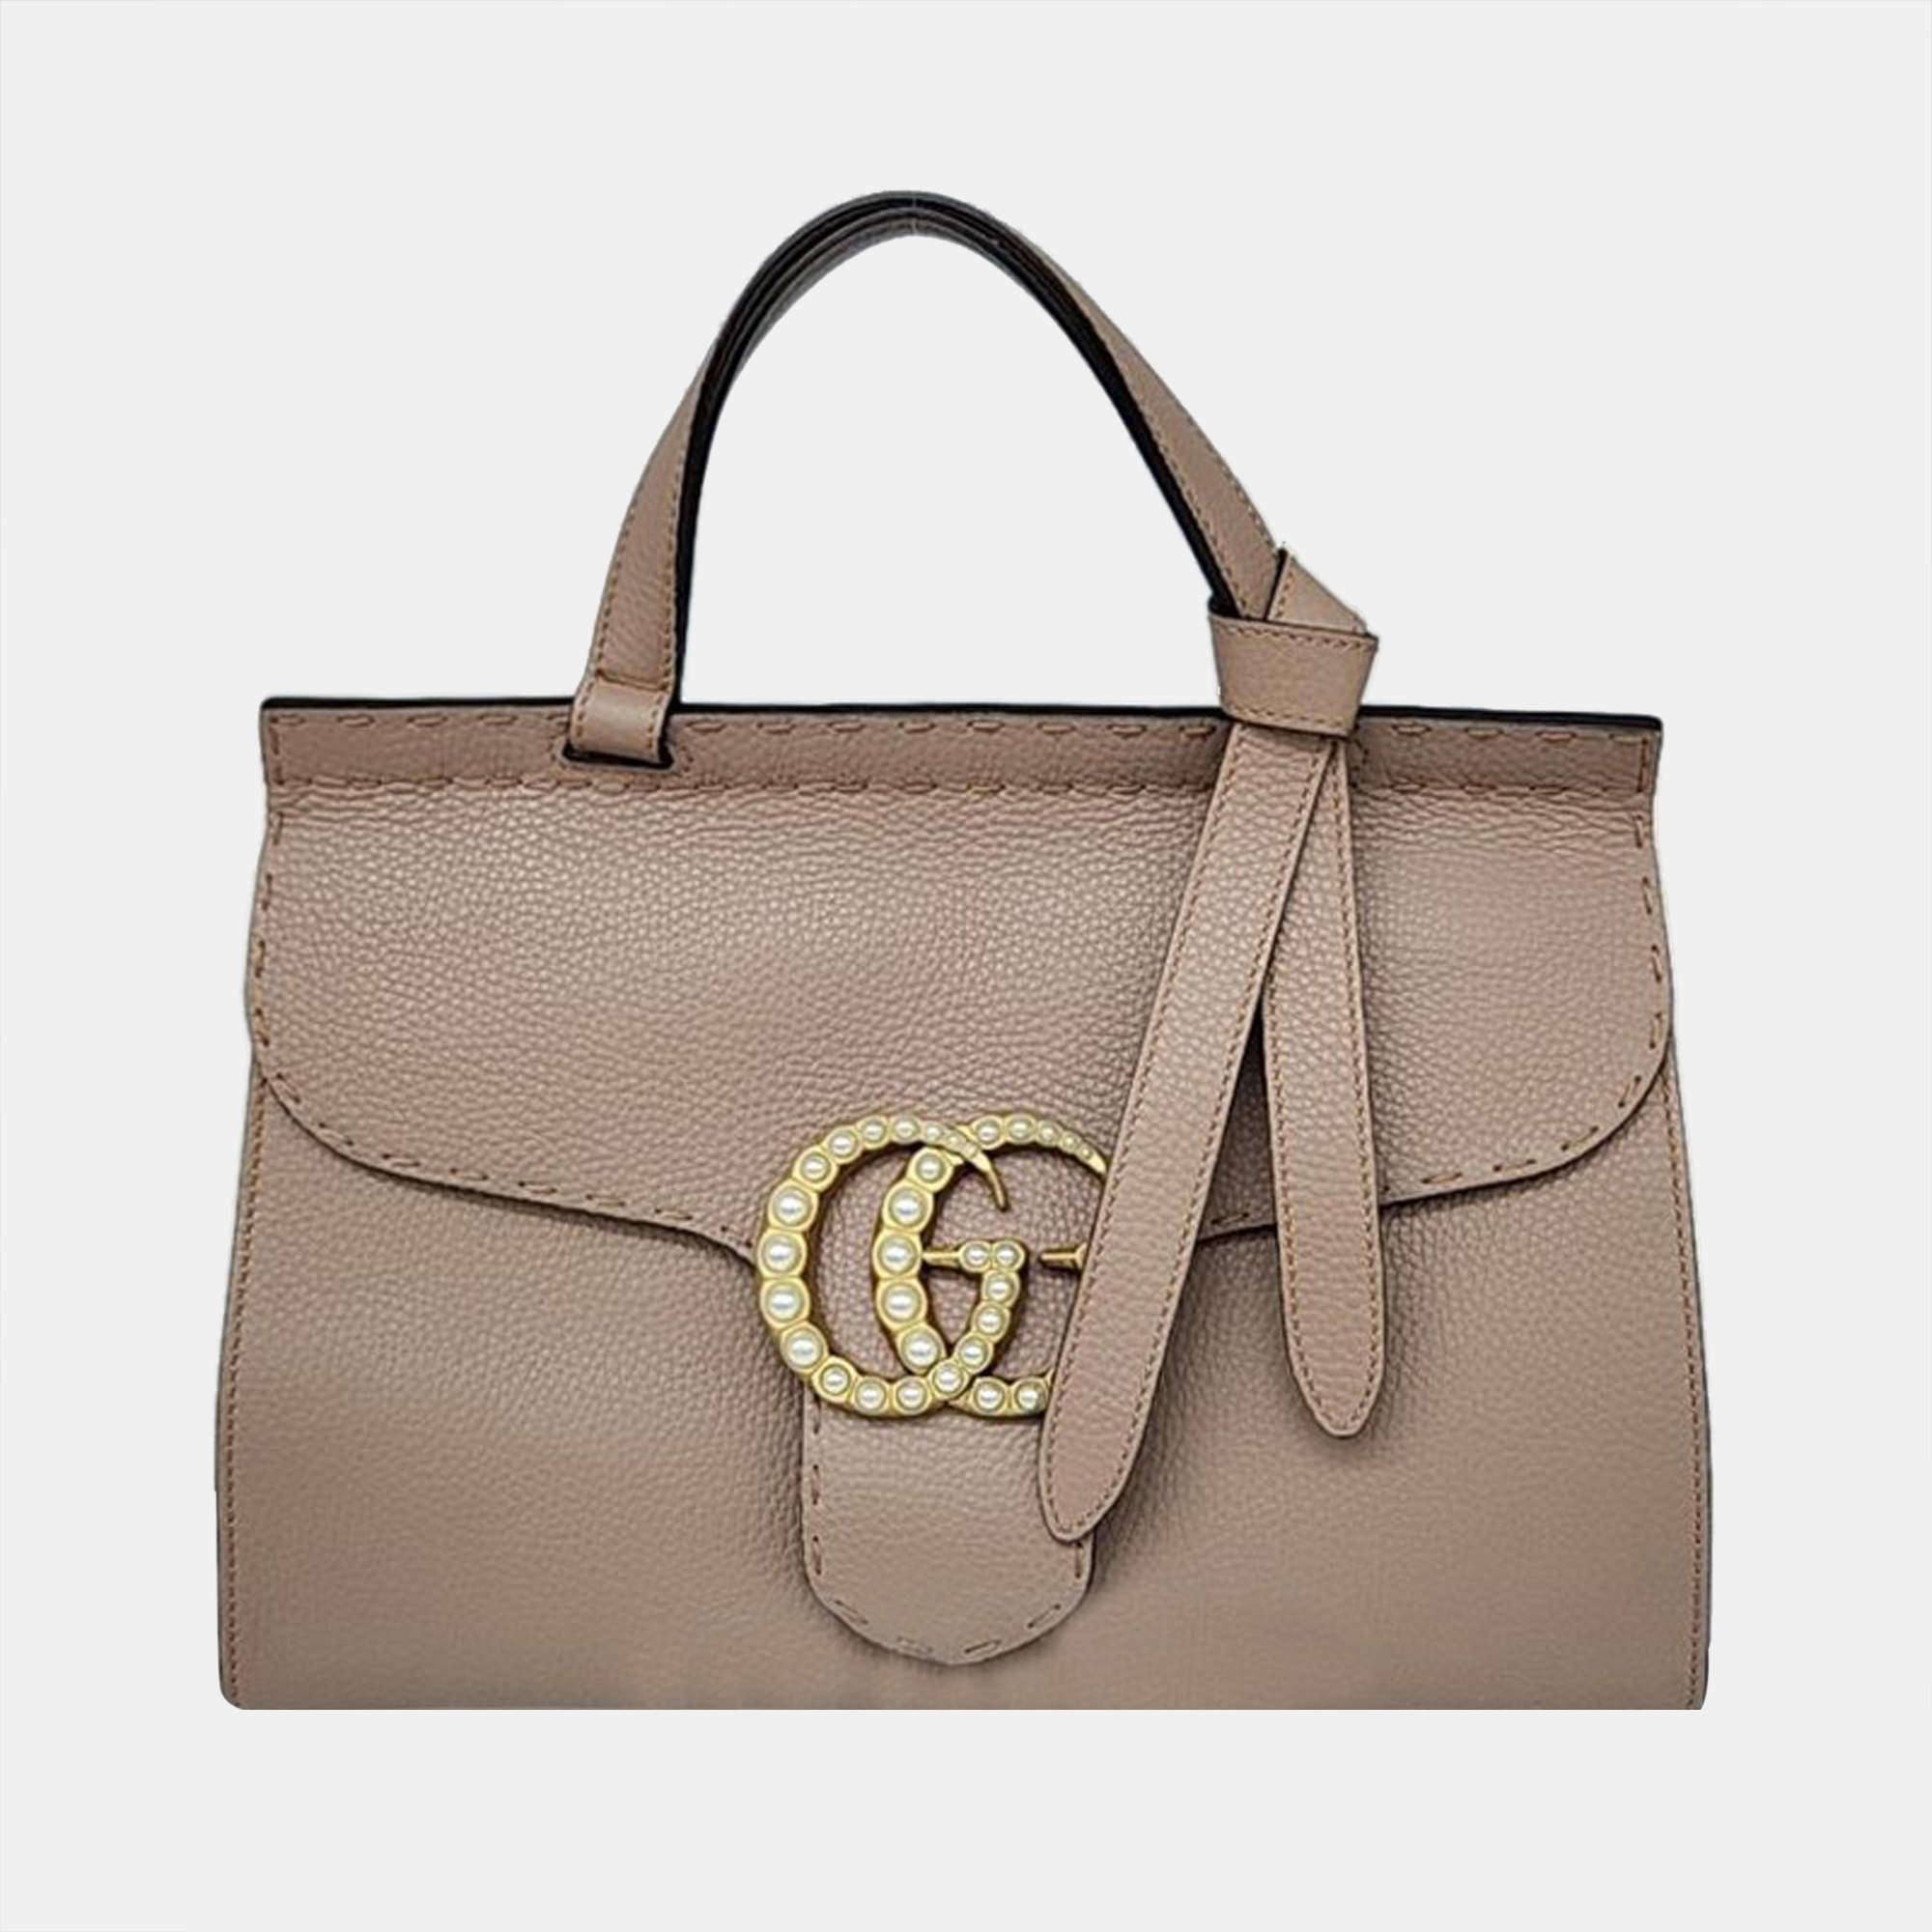 Gucci beige Leather GG Marmont Top Handle bag